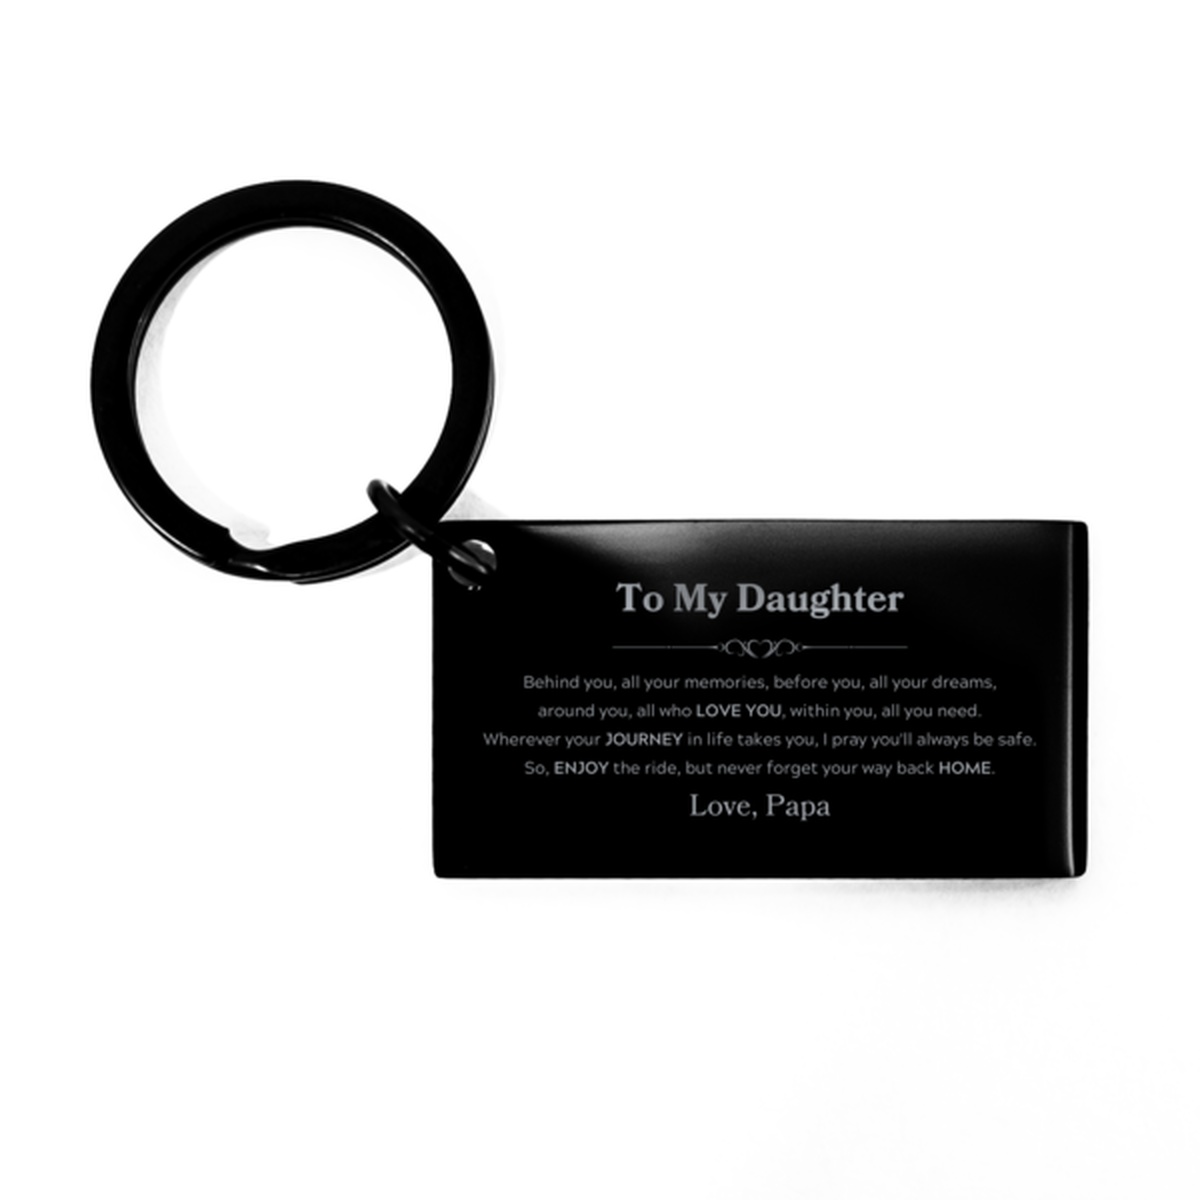 To My Daughter Graduation Gifts from Papa, Daughter Keychain Christmas Birthday Gifts for Daughter Behind you, all your memories, before you, all your dreams. Love, Papa